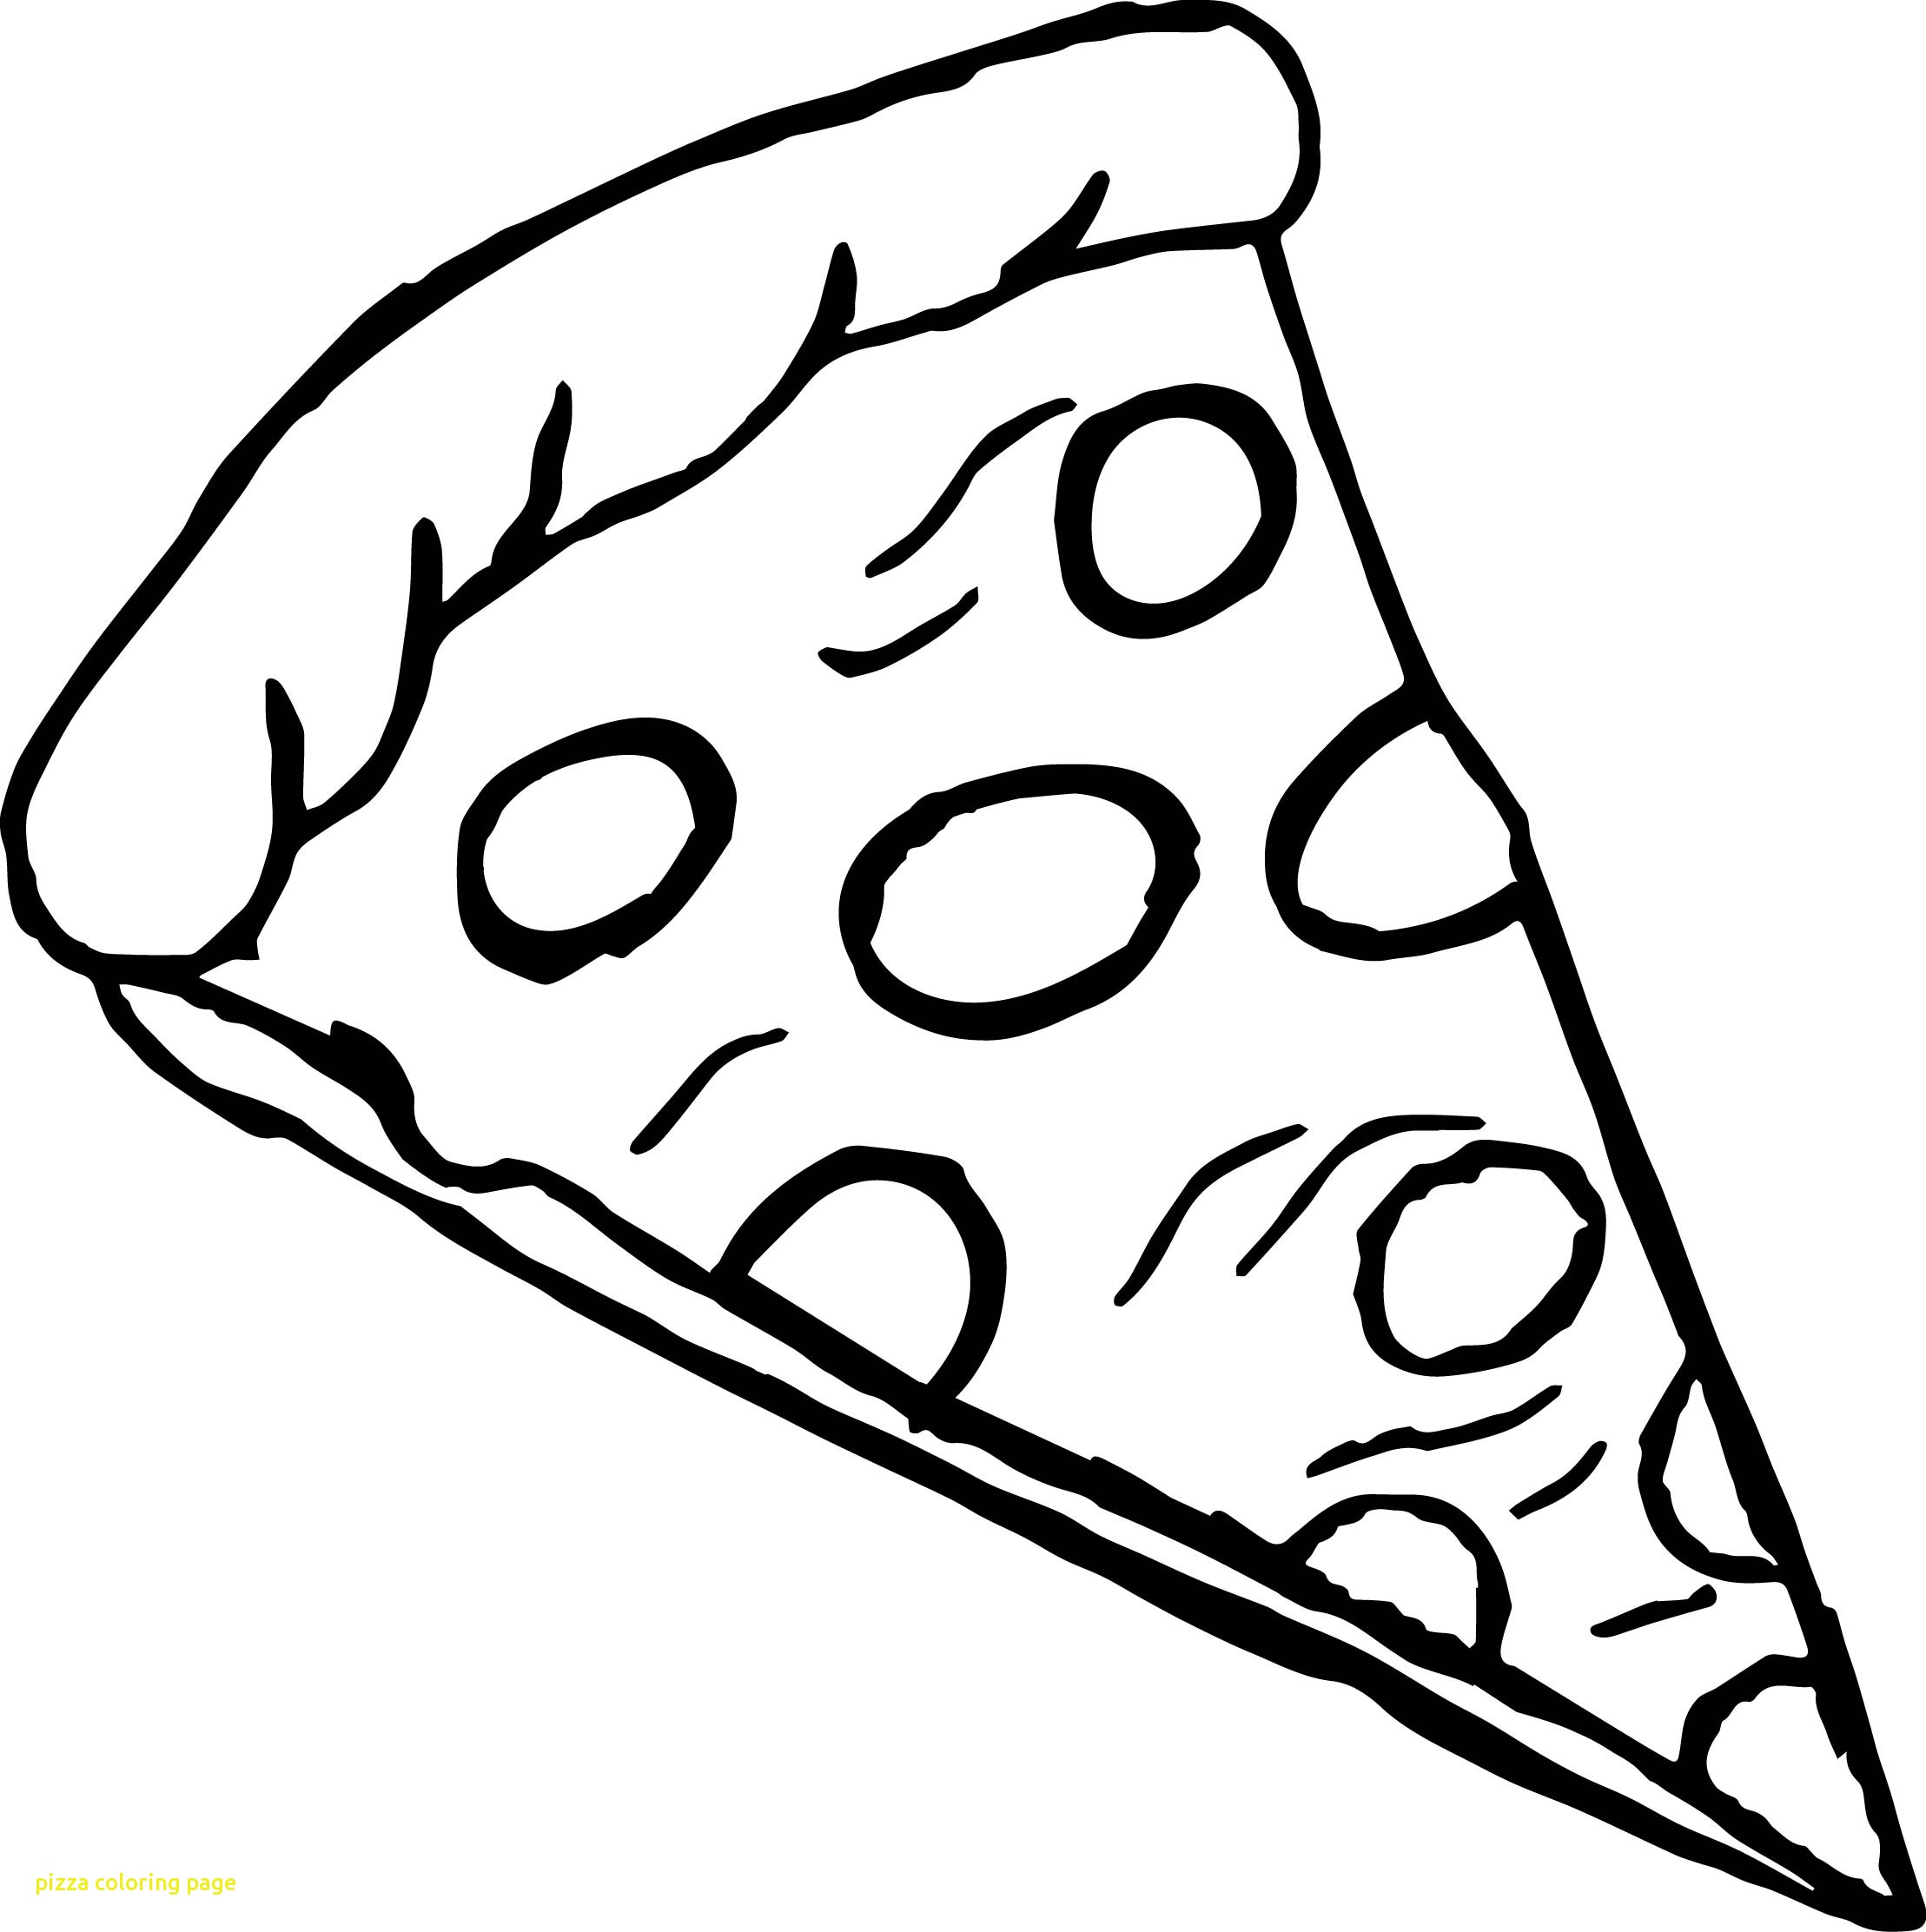 Free Printable Pizza Coloring Pages at GetDrawings Free